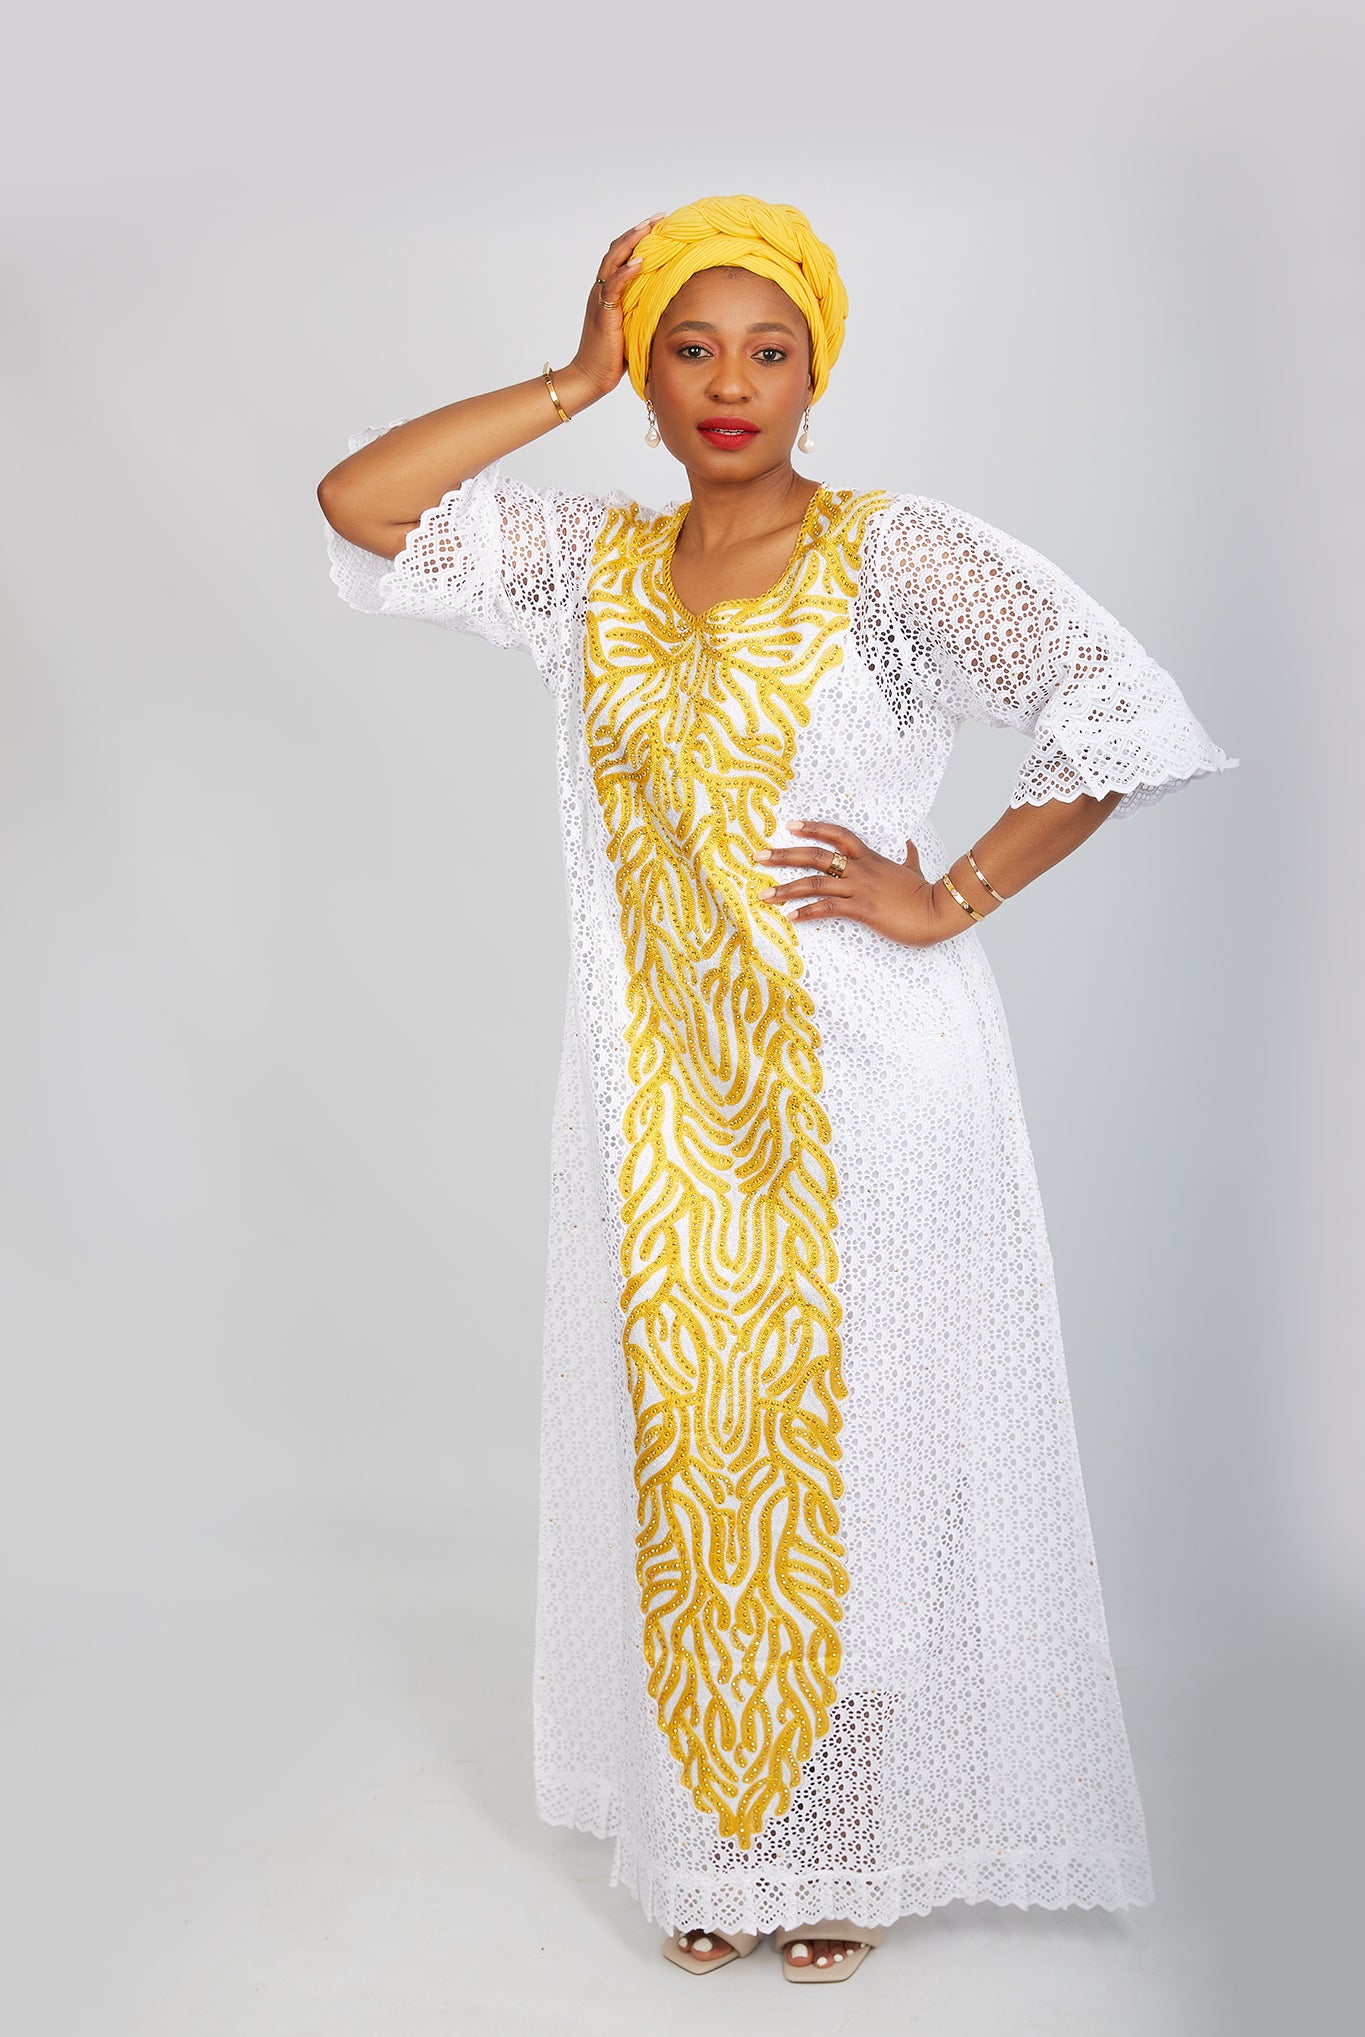 Buy African clothing online | Shop African dresses online UK | Purchase African clothing online.